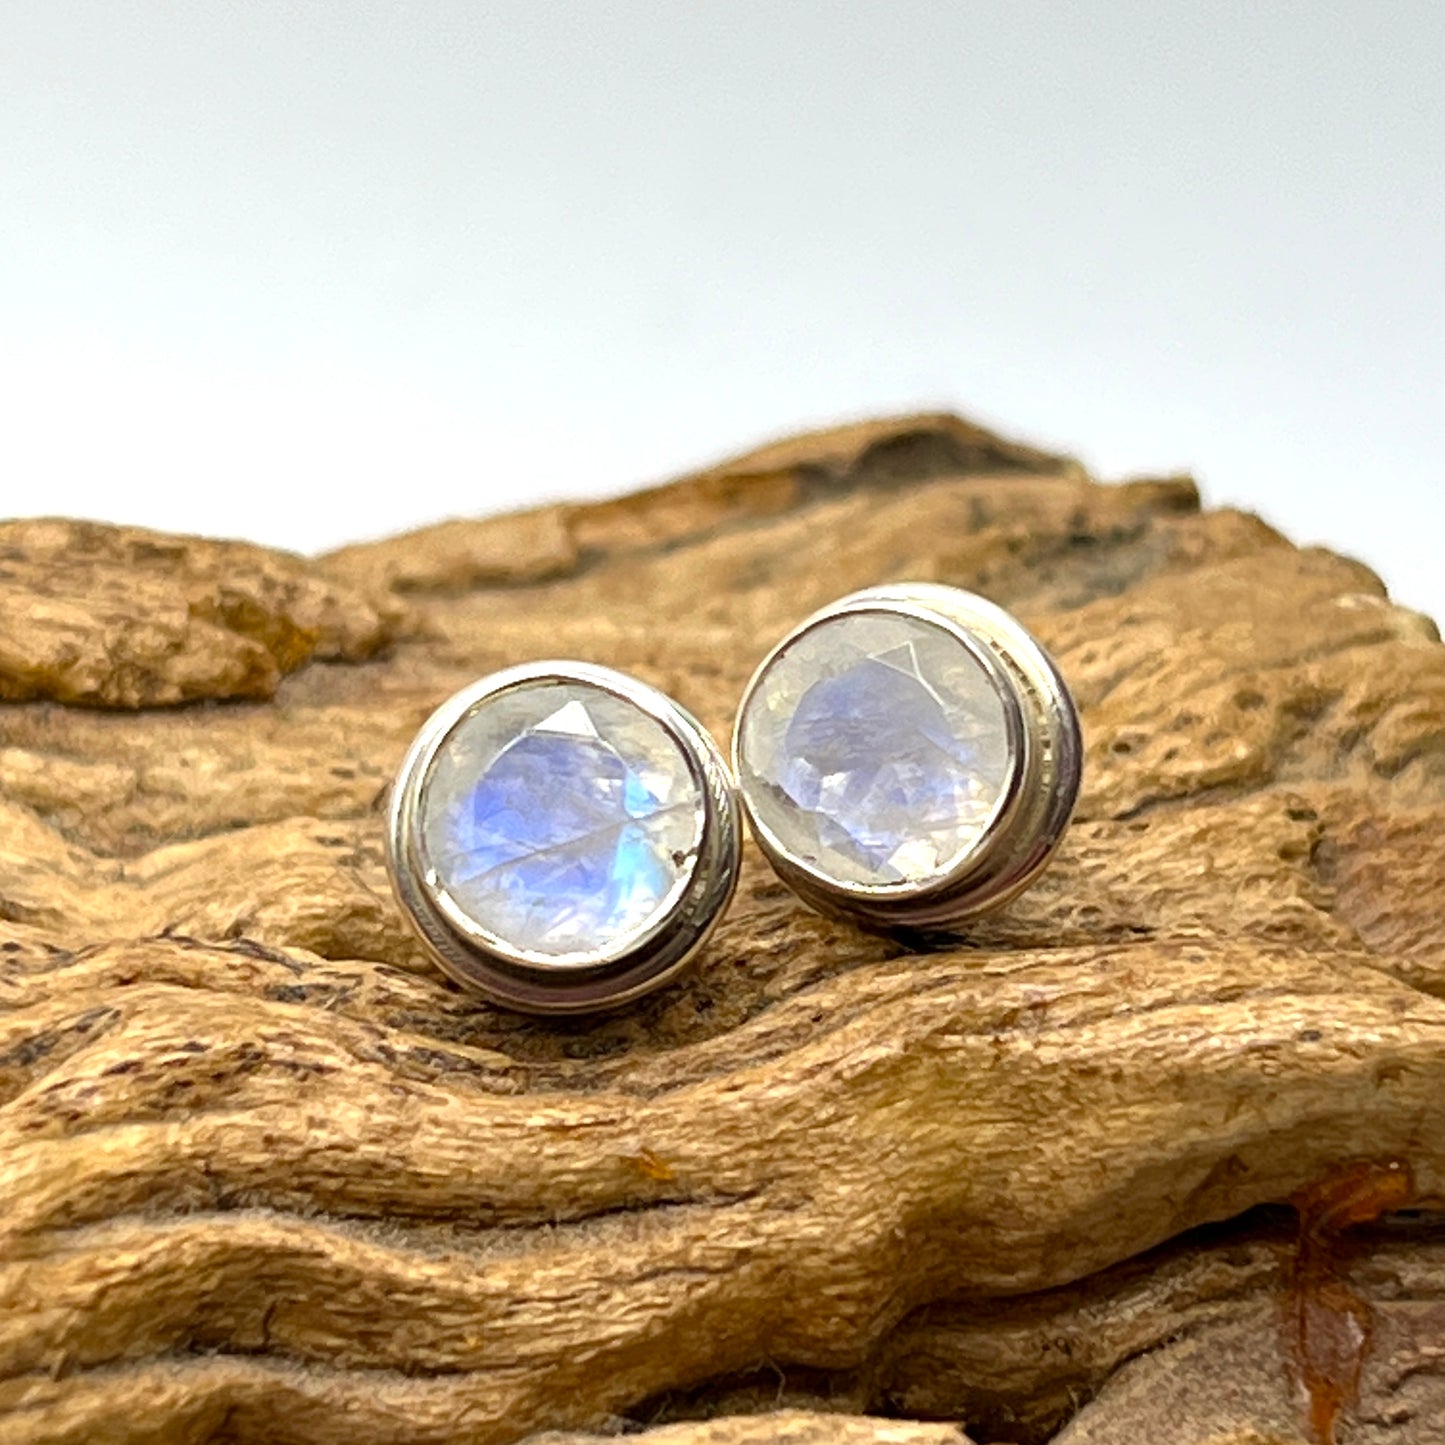 8mm Round Faceted Studs Earrings